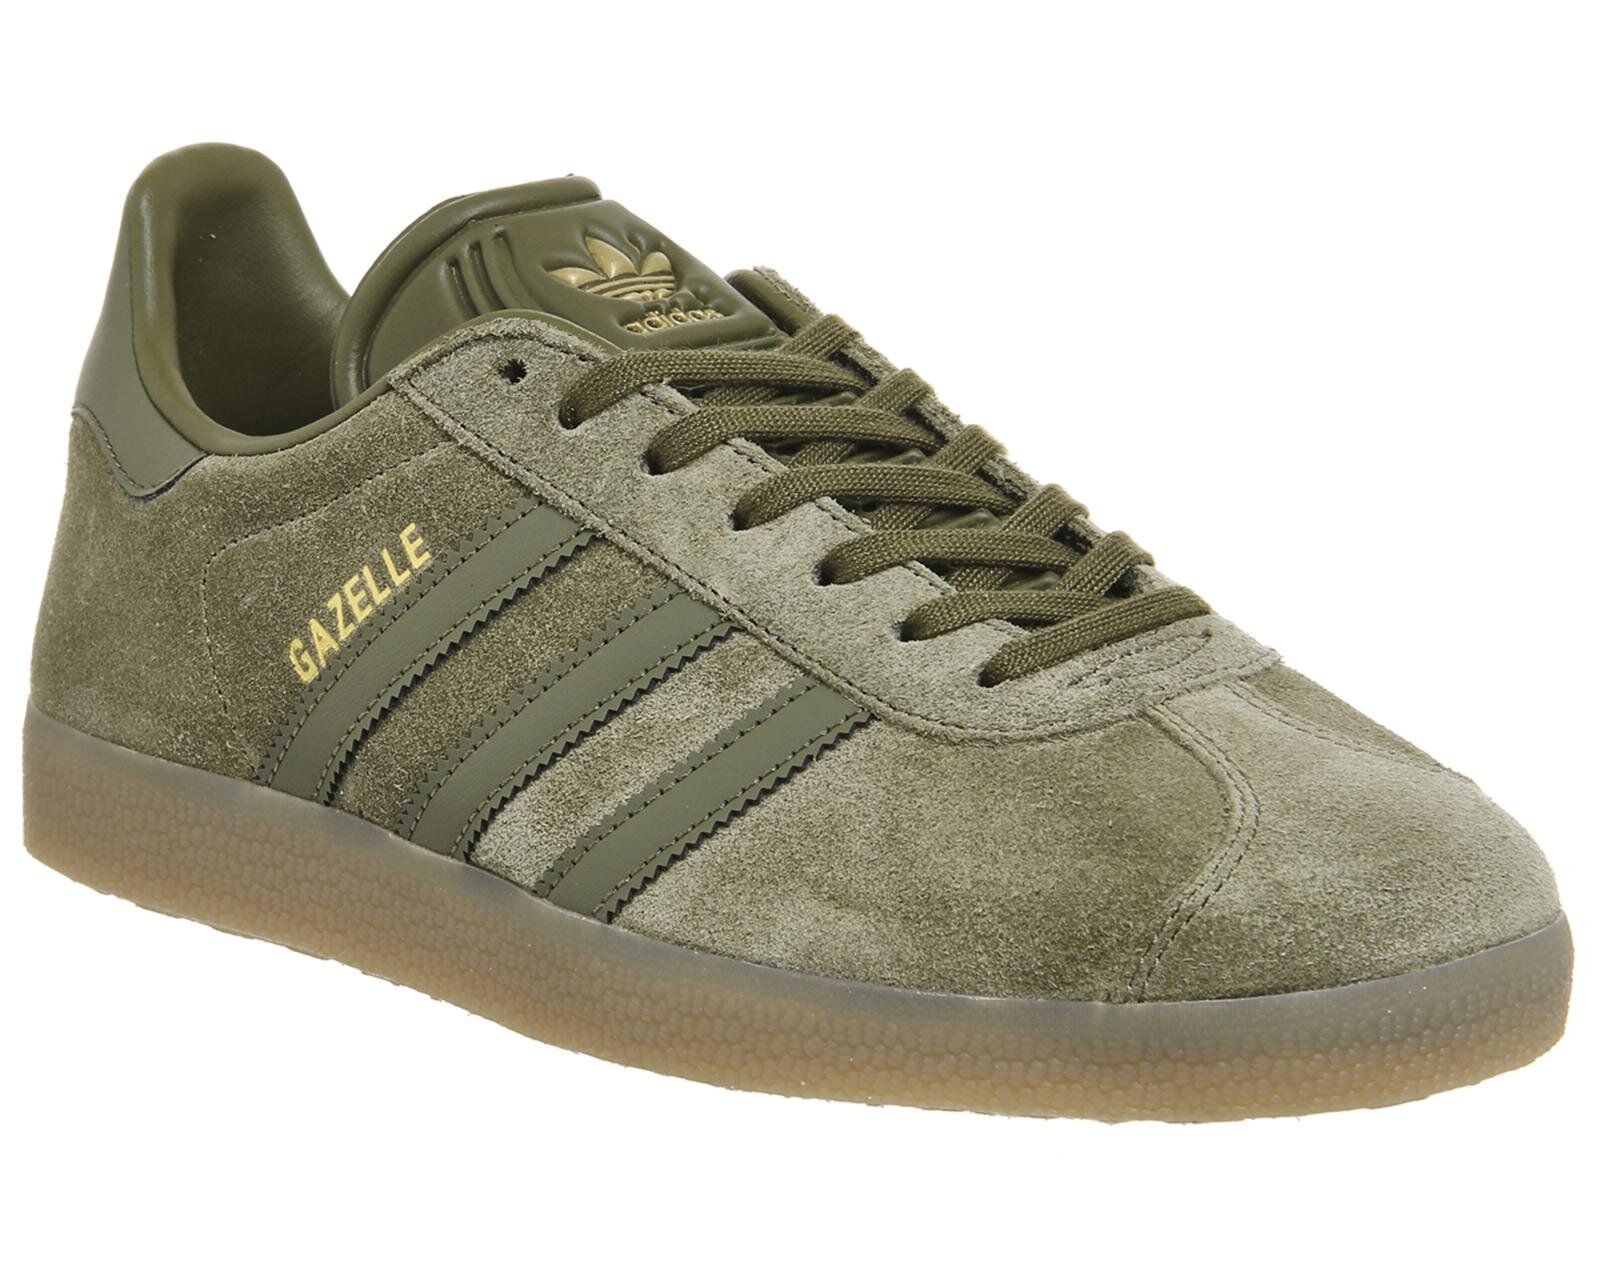 Adidas Gazelle Sneakers in Olive Suede — UFO No More